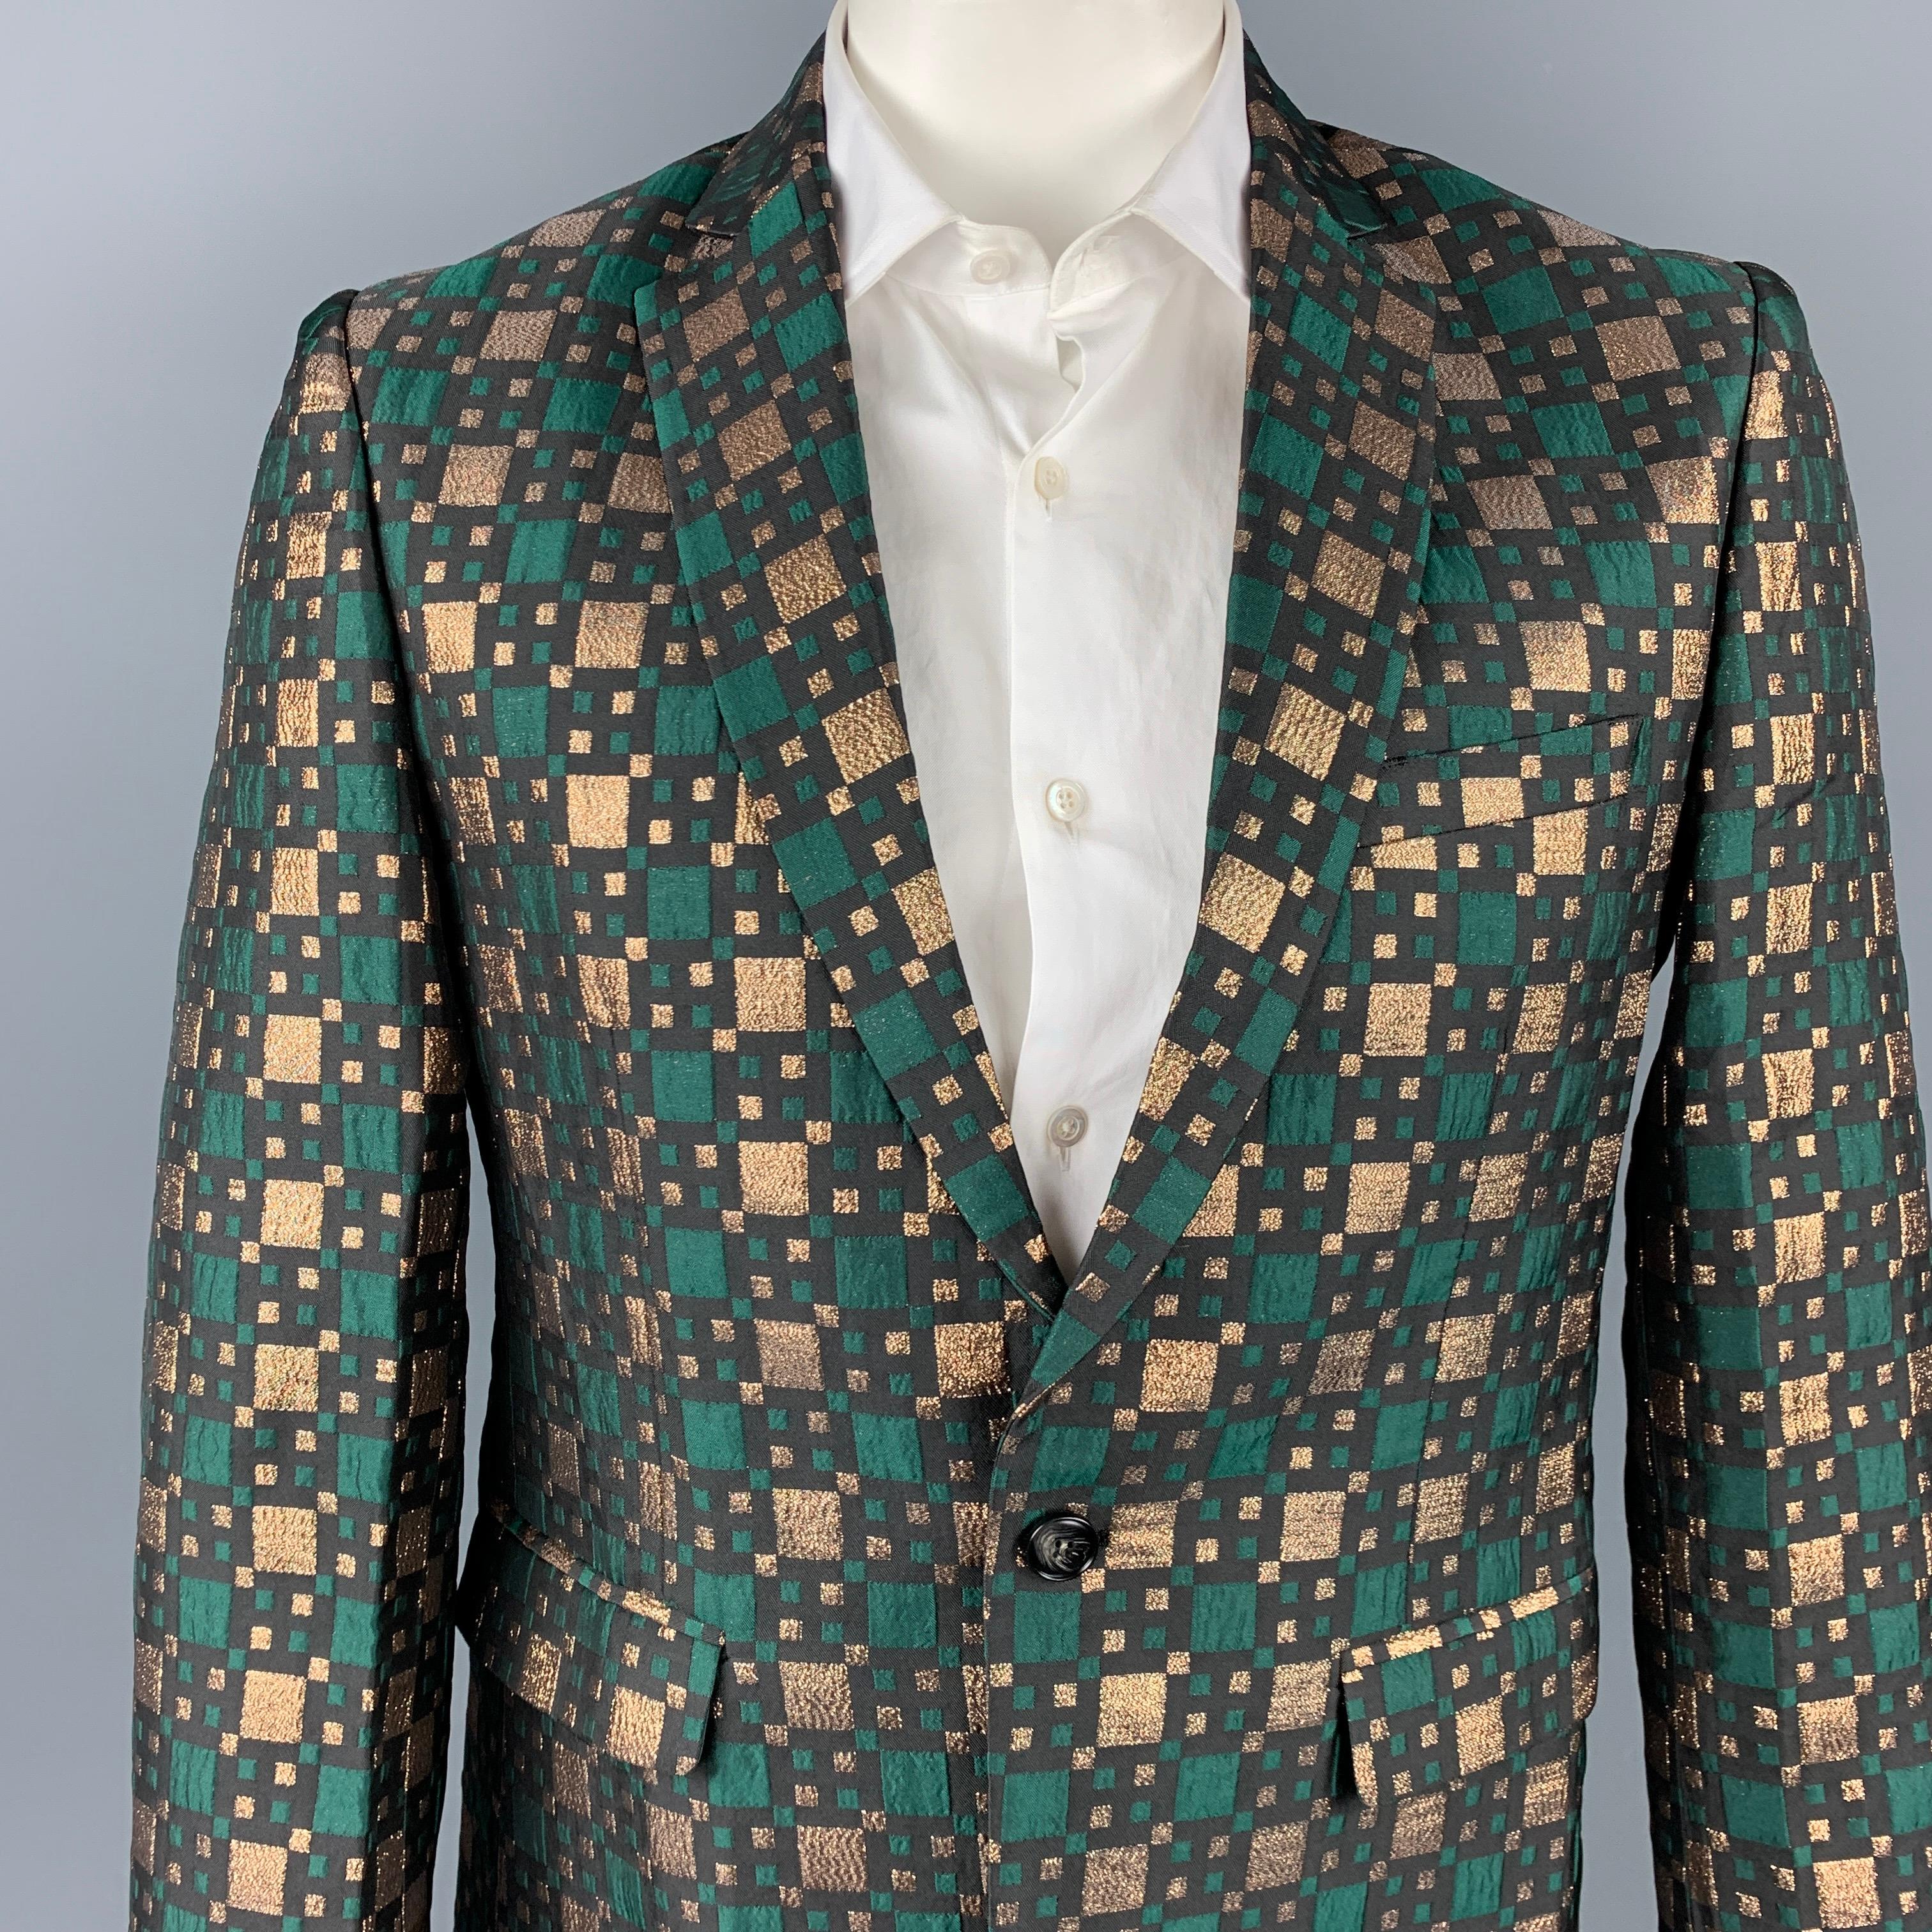 CUSTOM MADE sport coat comes in a green & gold jacquard material featuring a notch lapel, flap pockets, and a single button closure. 

Very Good Pre-Owned Condition.
Marked: No size marked

Measurements:

Shoulder: 18. in.
Chest: 42 in.
Sleeve: 26